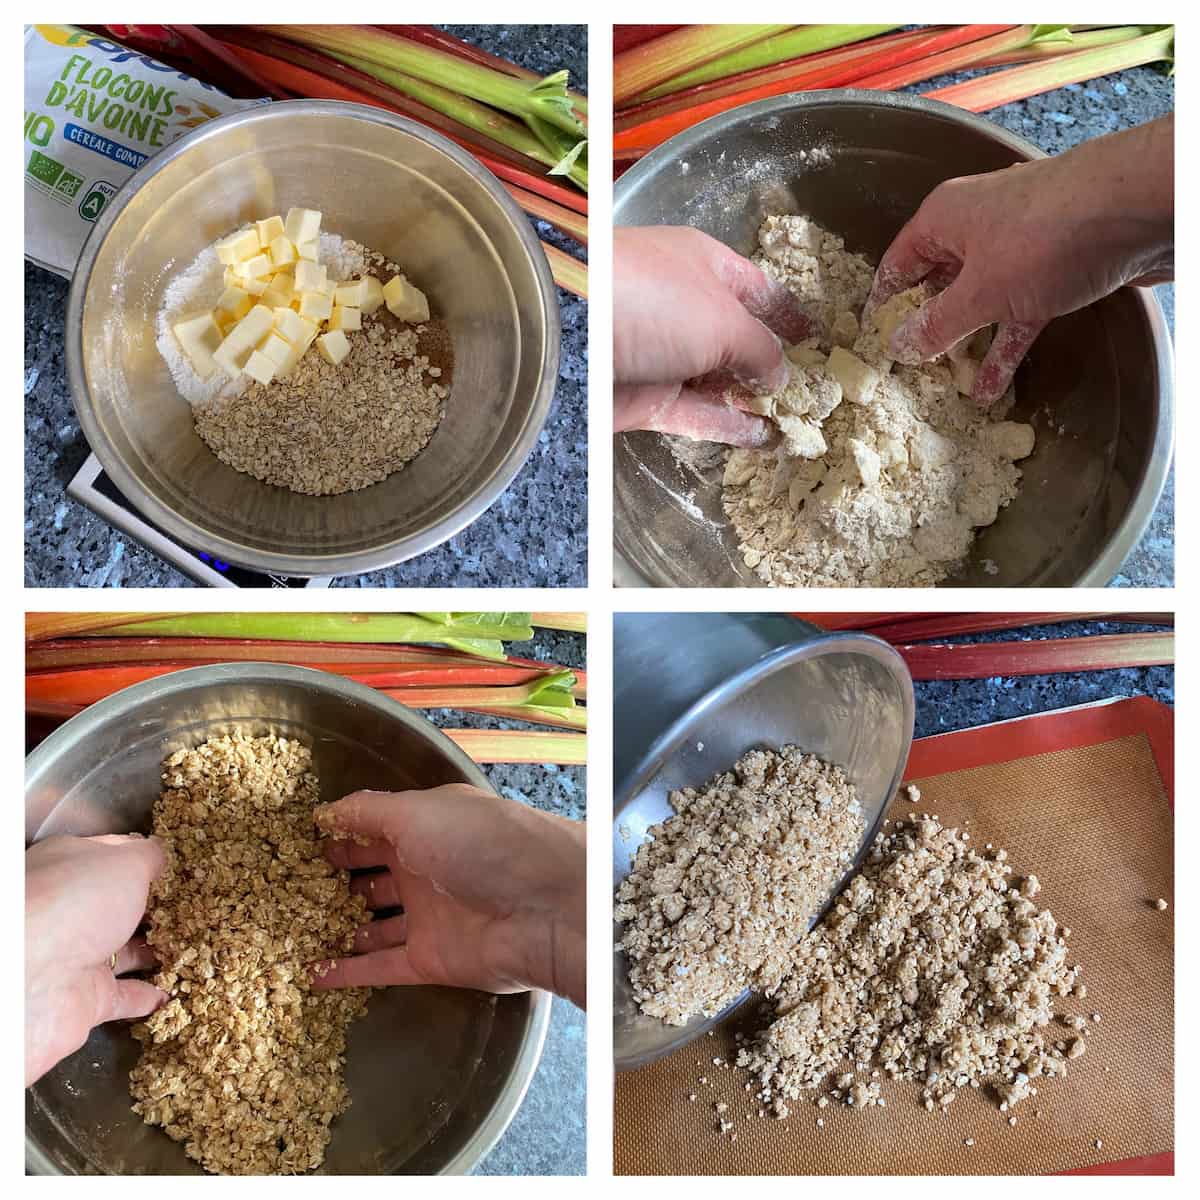 rubbing butter into oats and flour then toasting to make a crunchy crumble